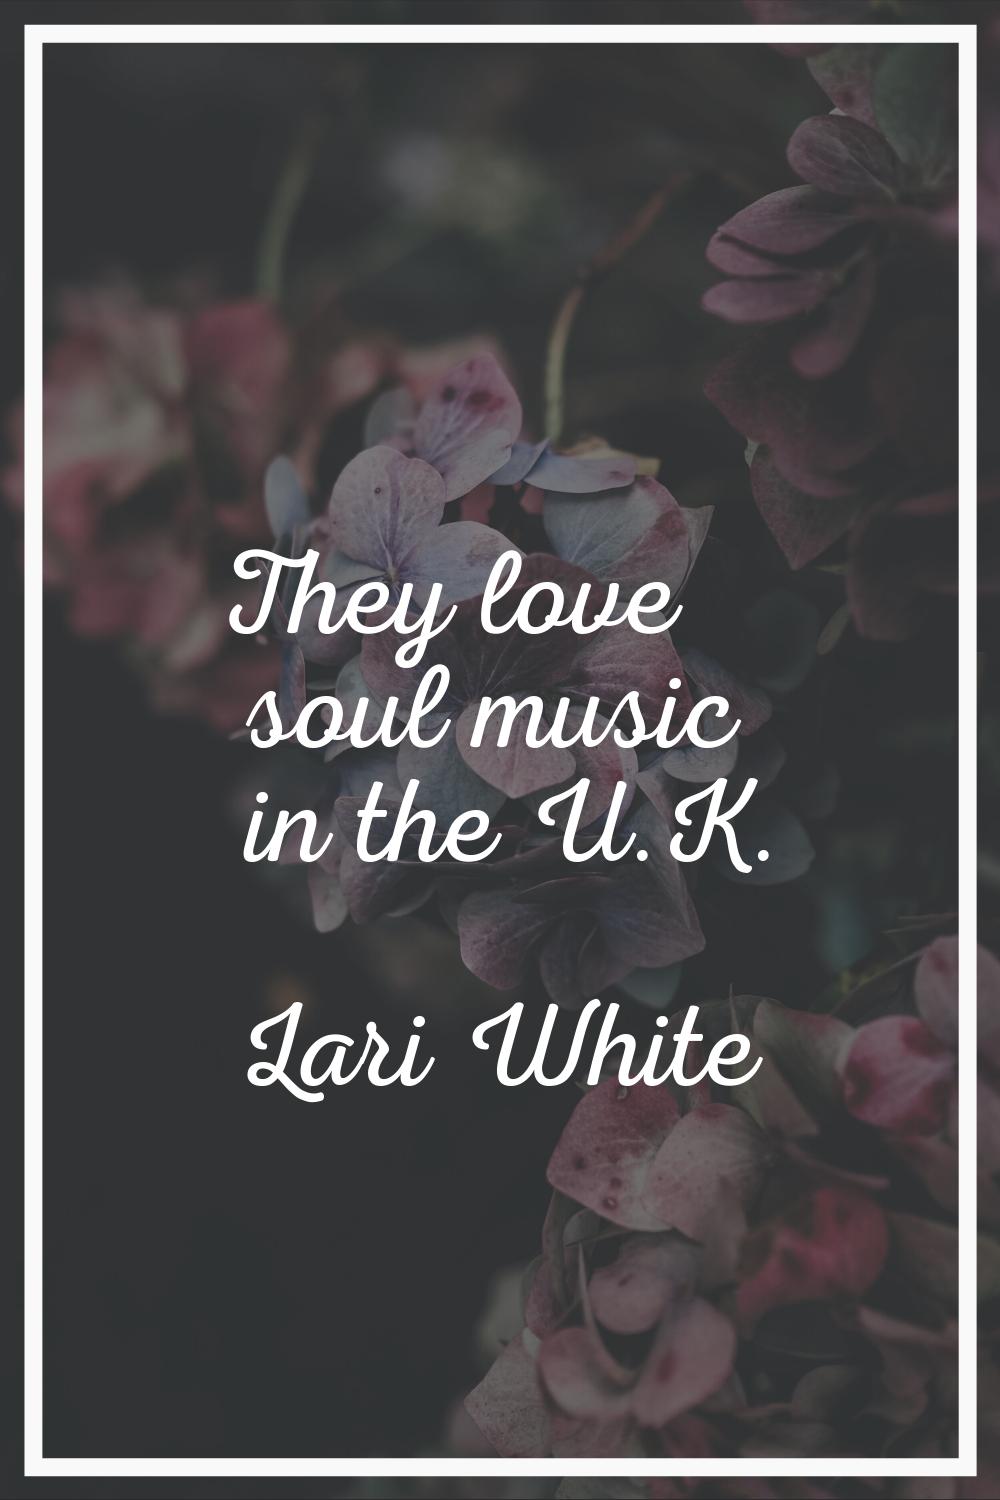 They love soul music in the U.K.